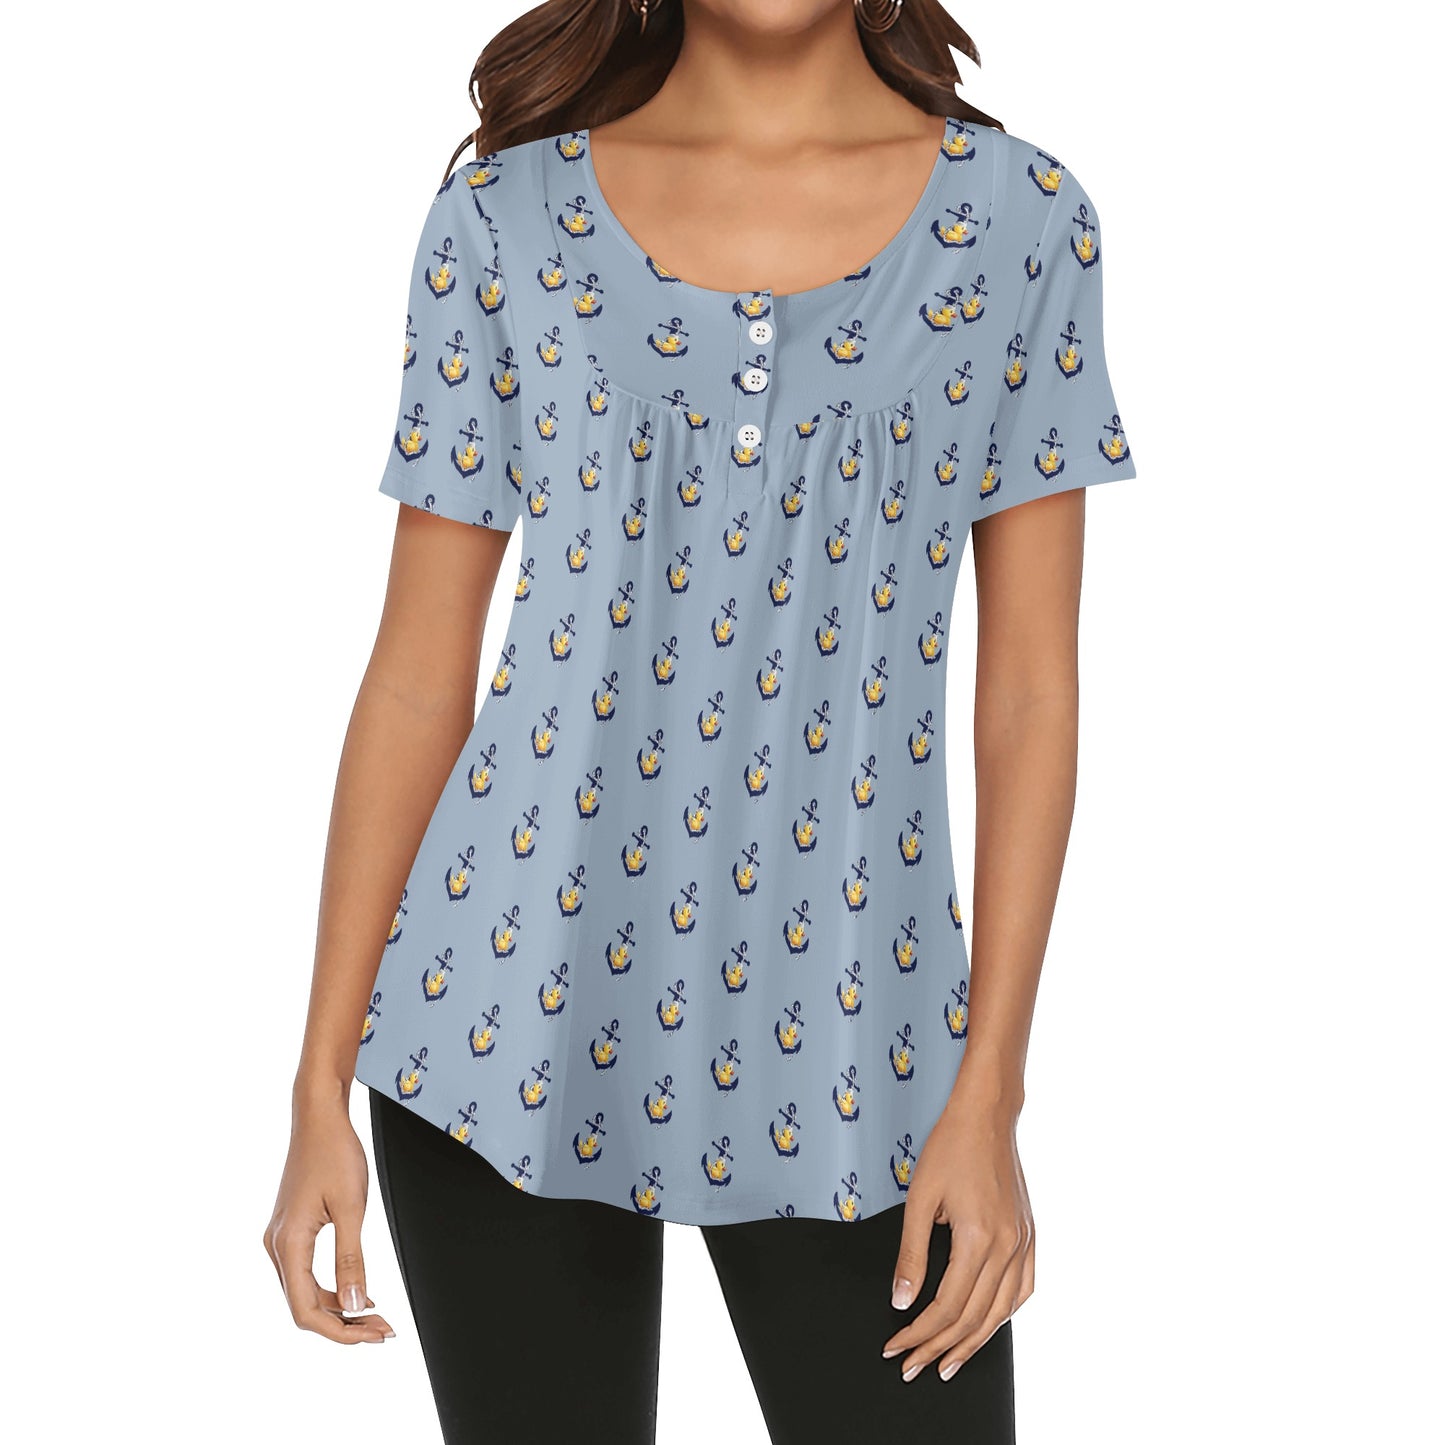 Ahoy Ducky Womens Scoop Neck Short Sleeved Blouse